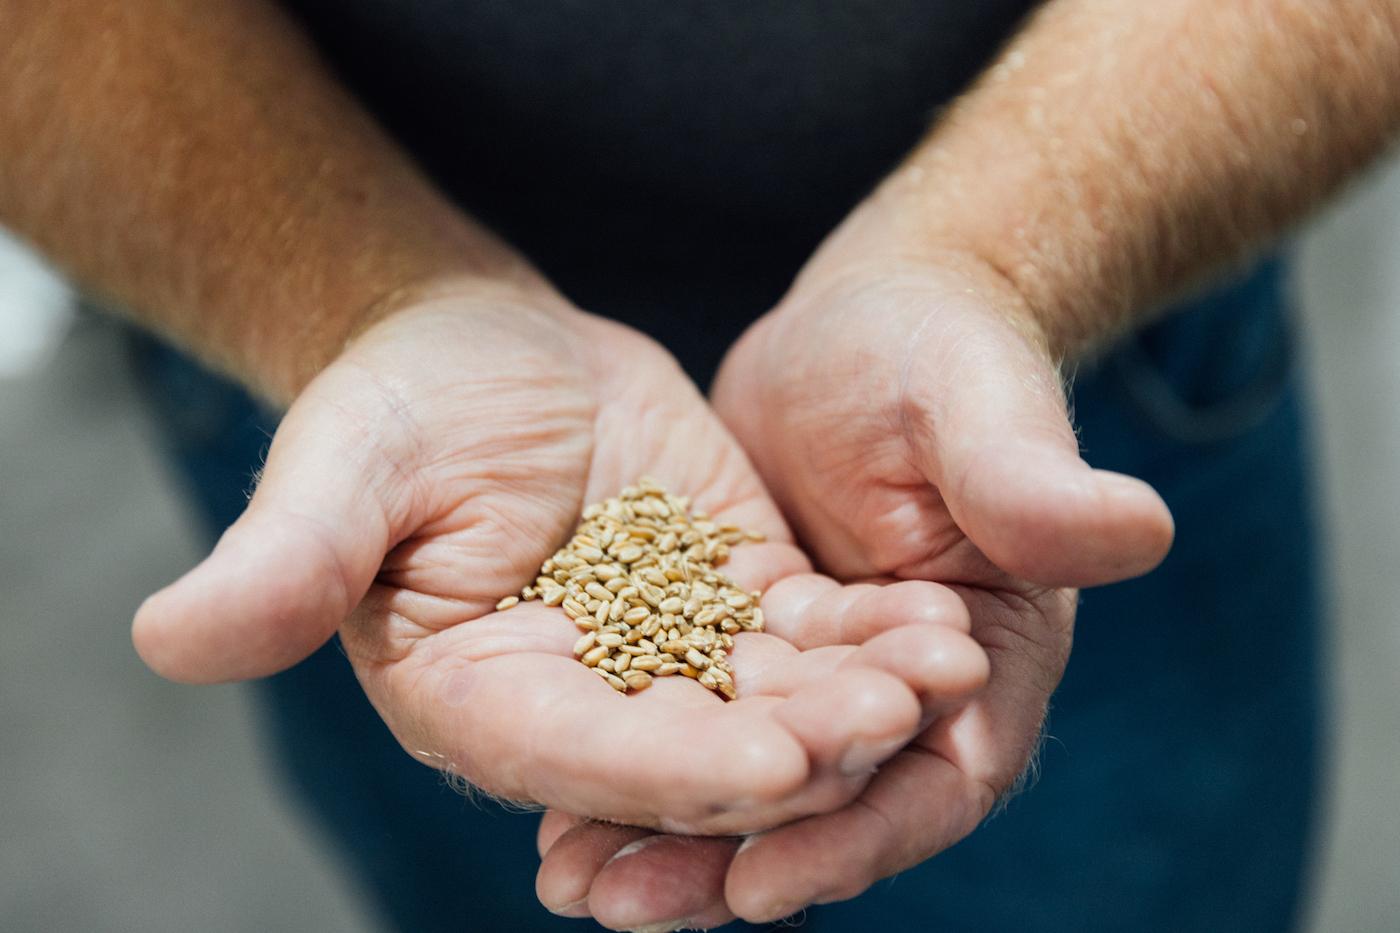 Harold Wilken holds wheat kernels in his outstretched hands